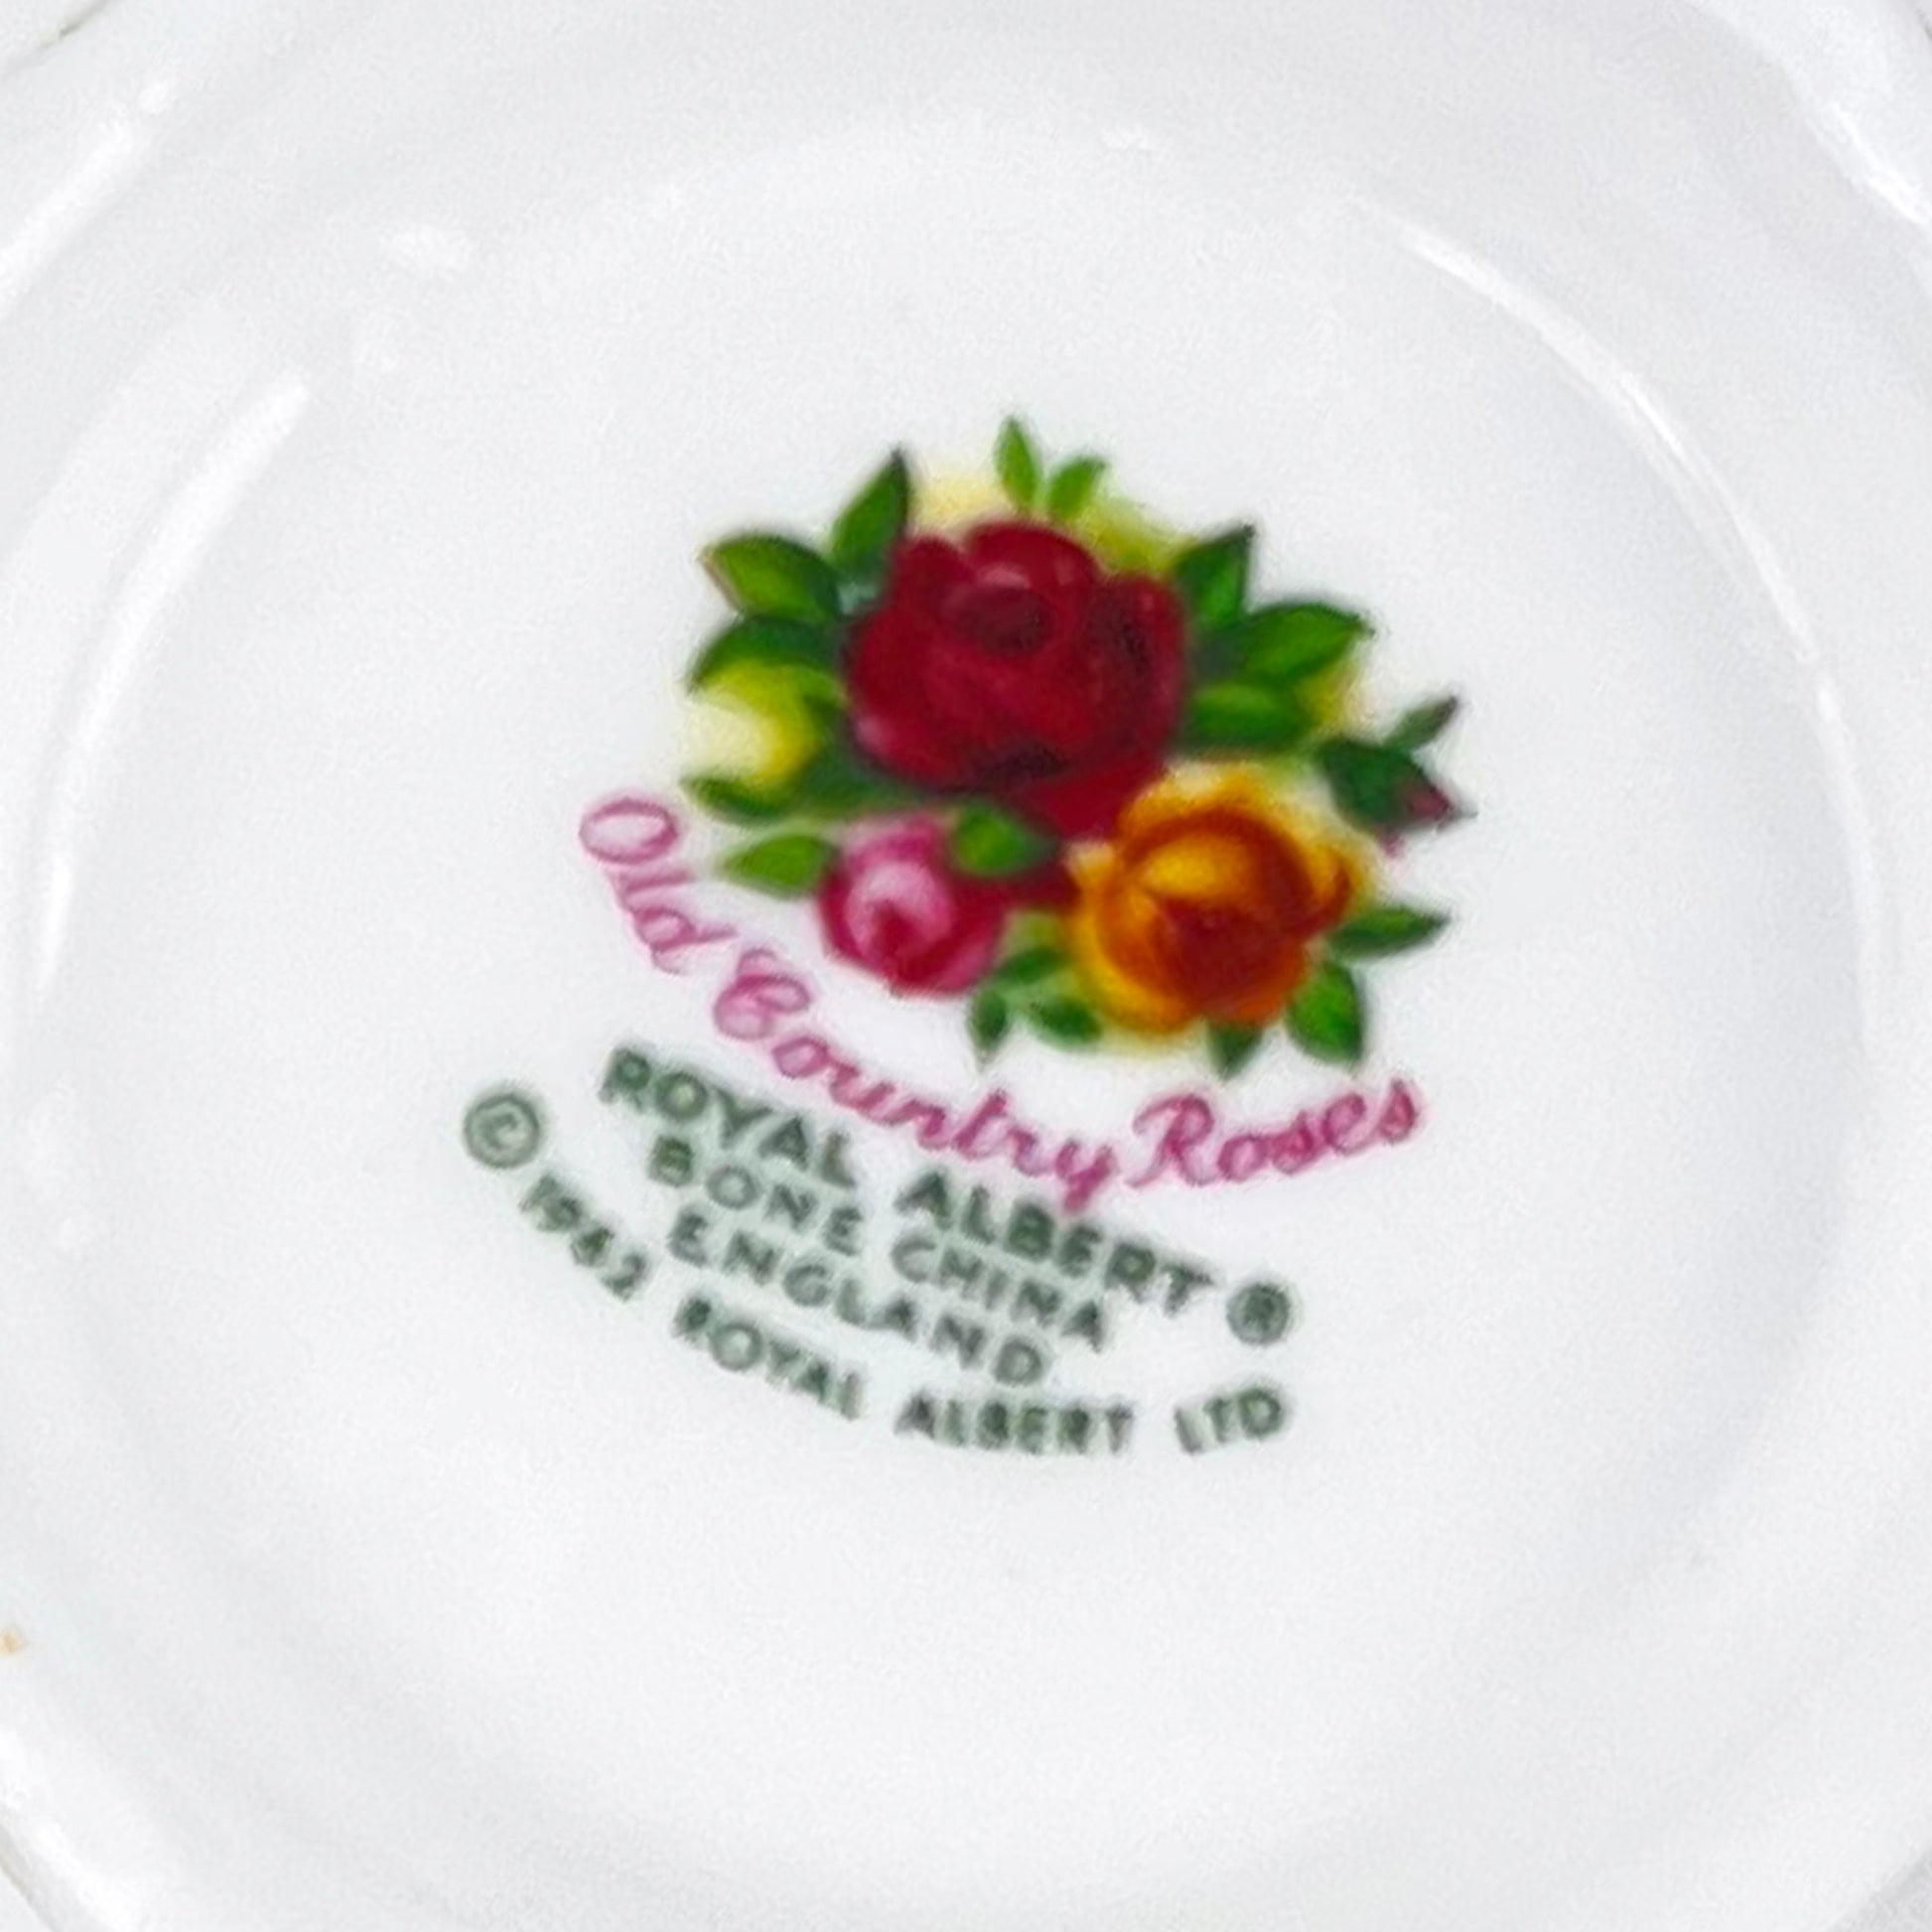 Royal Albert Vintage Old Country Roses Entree Plate